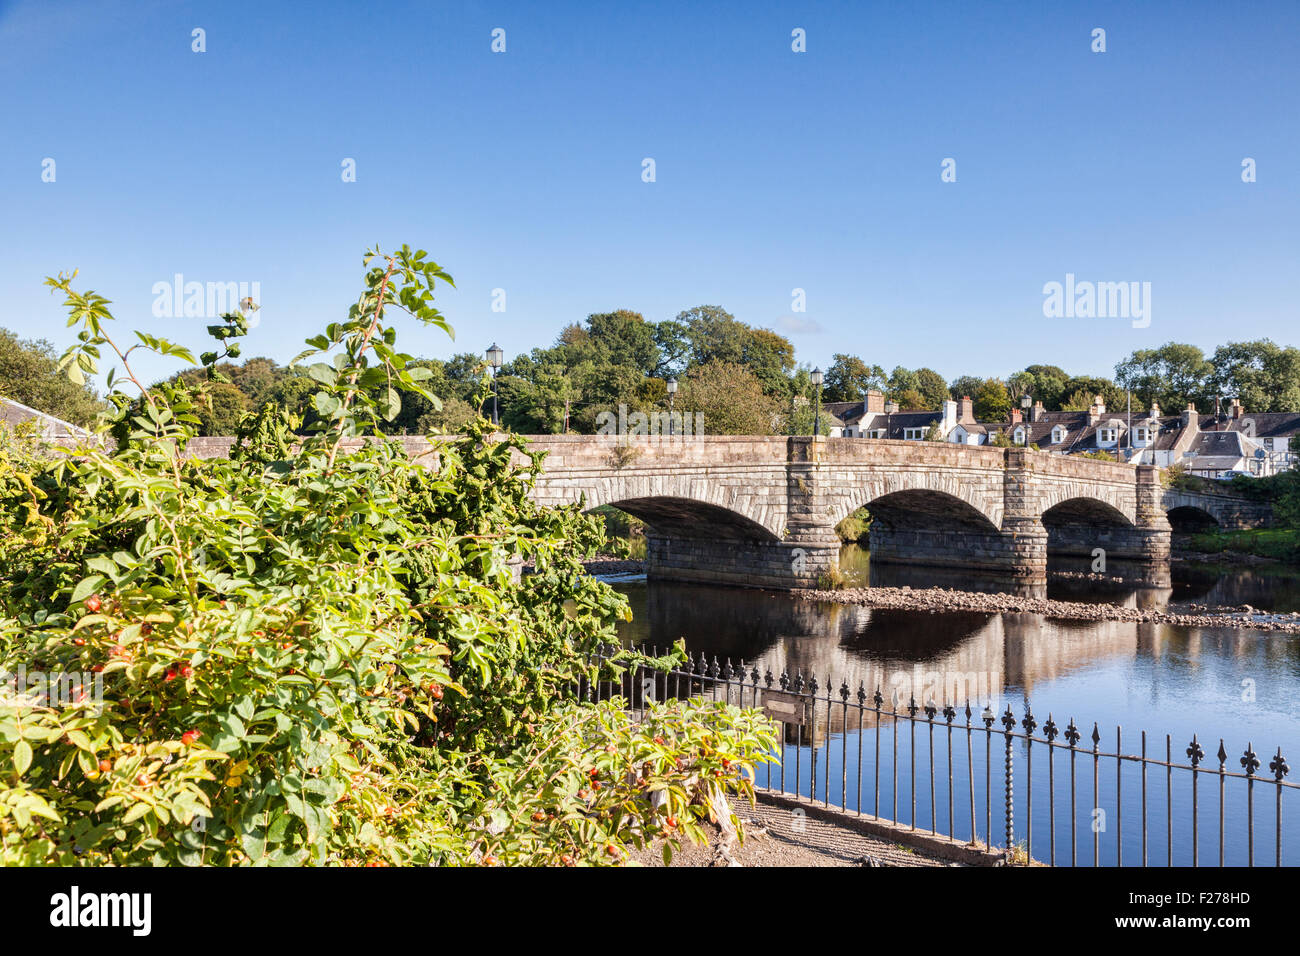 Bridge over the River Cree at Newton Stewart, in The Machars region, Dumfries and Galloway, Scotland. Stock Photo